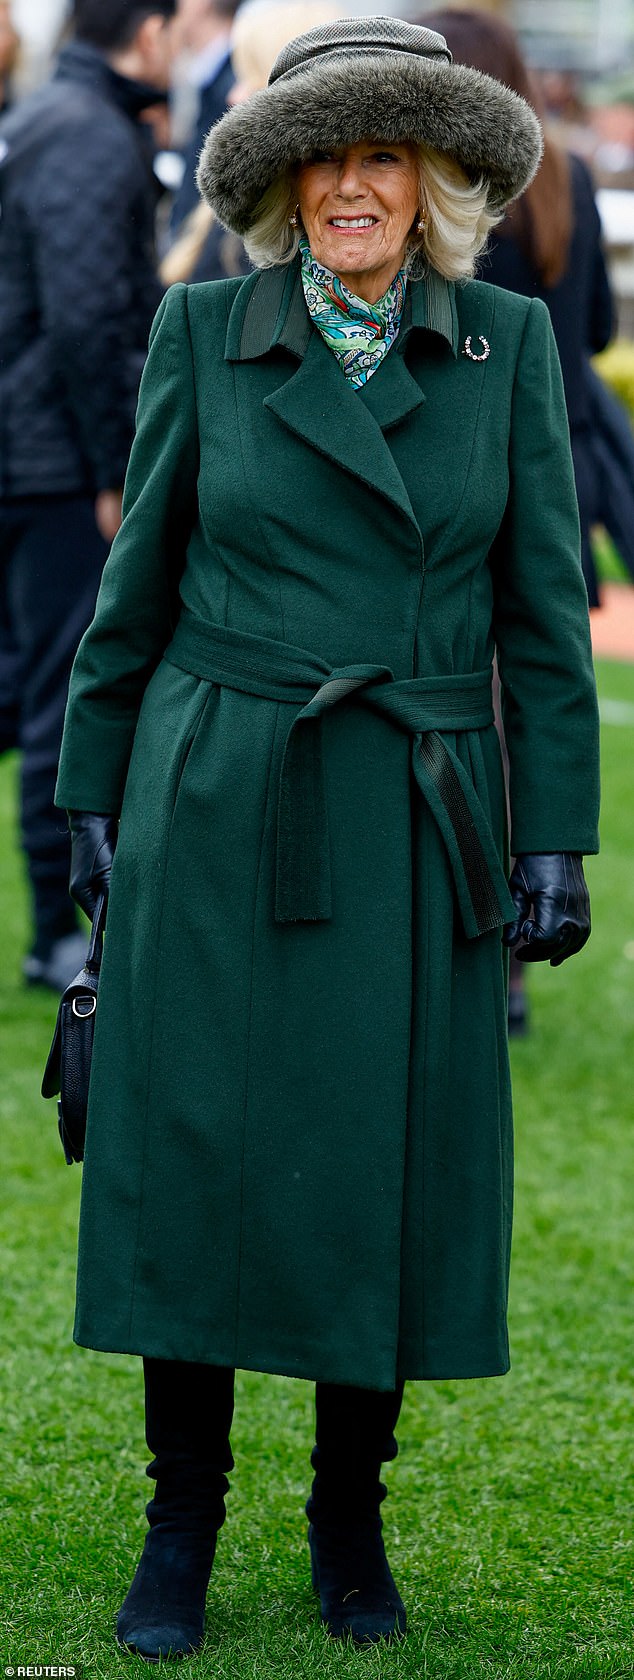 Camilla donned a structured green coat and furry gray hat to ward off the gloomy weather at the event today